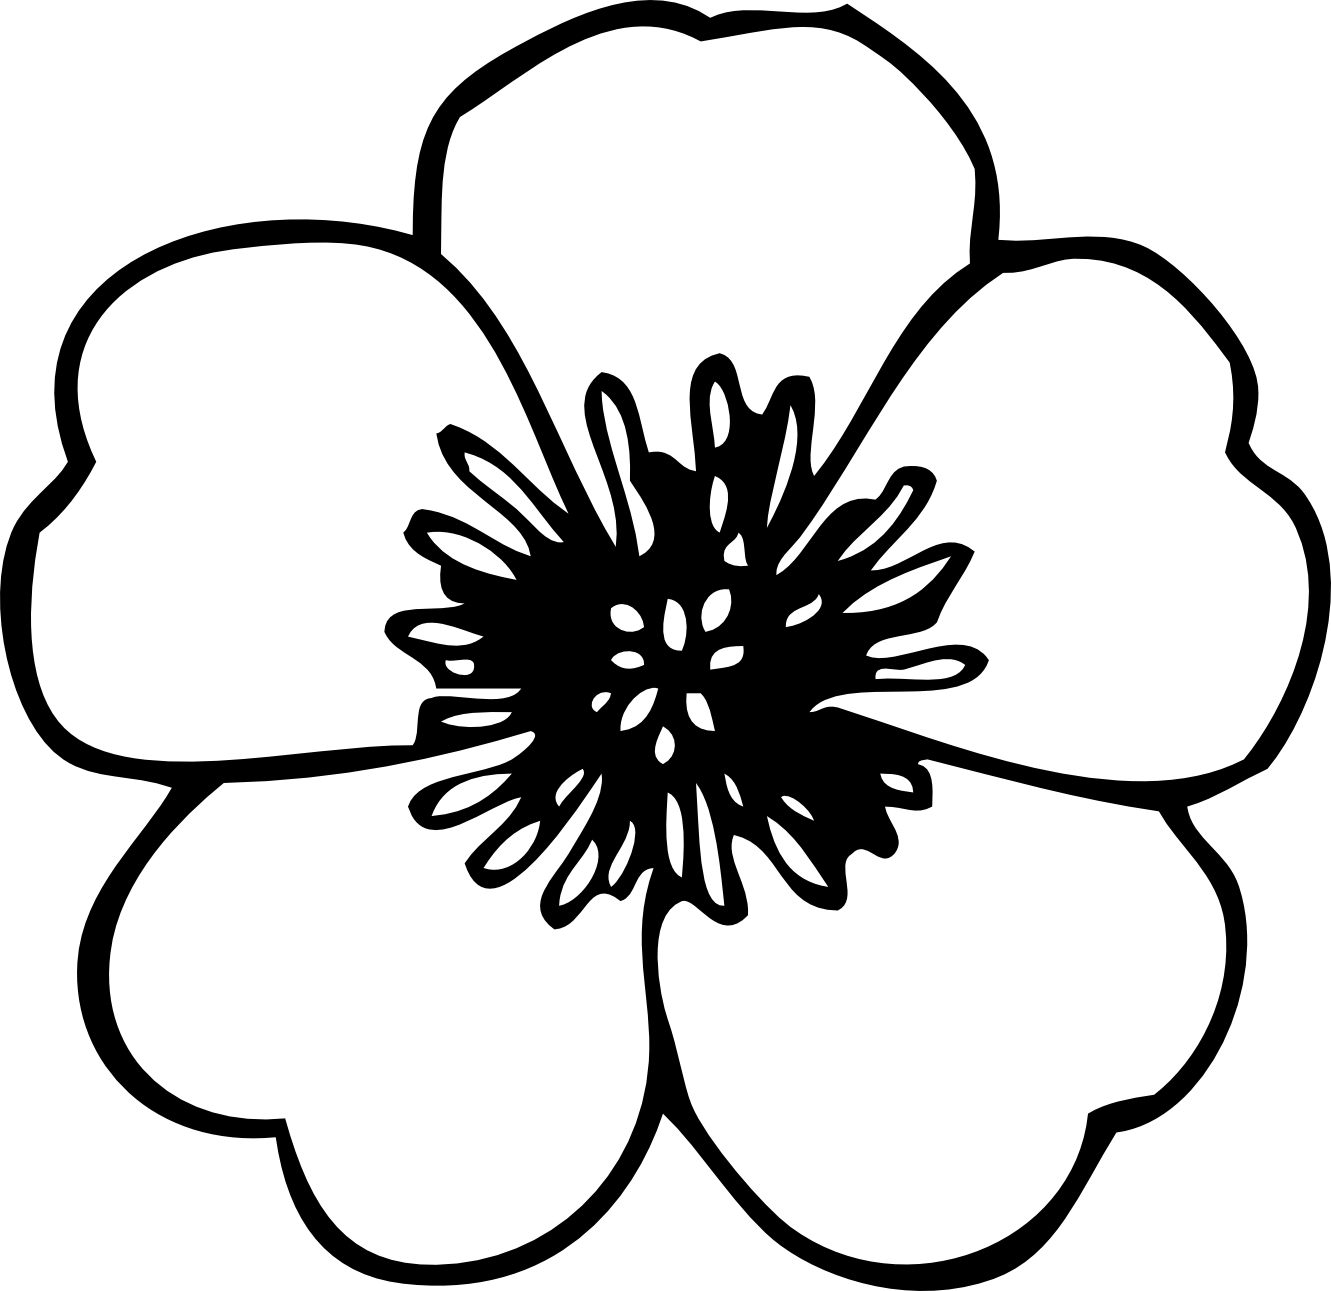 Flowers Black and White Logo - Flower Black And White Transparent PNG Picture Icon and PNG